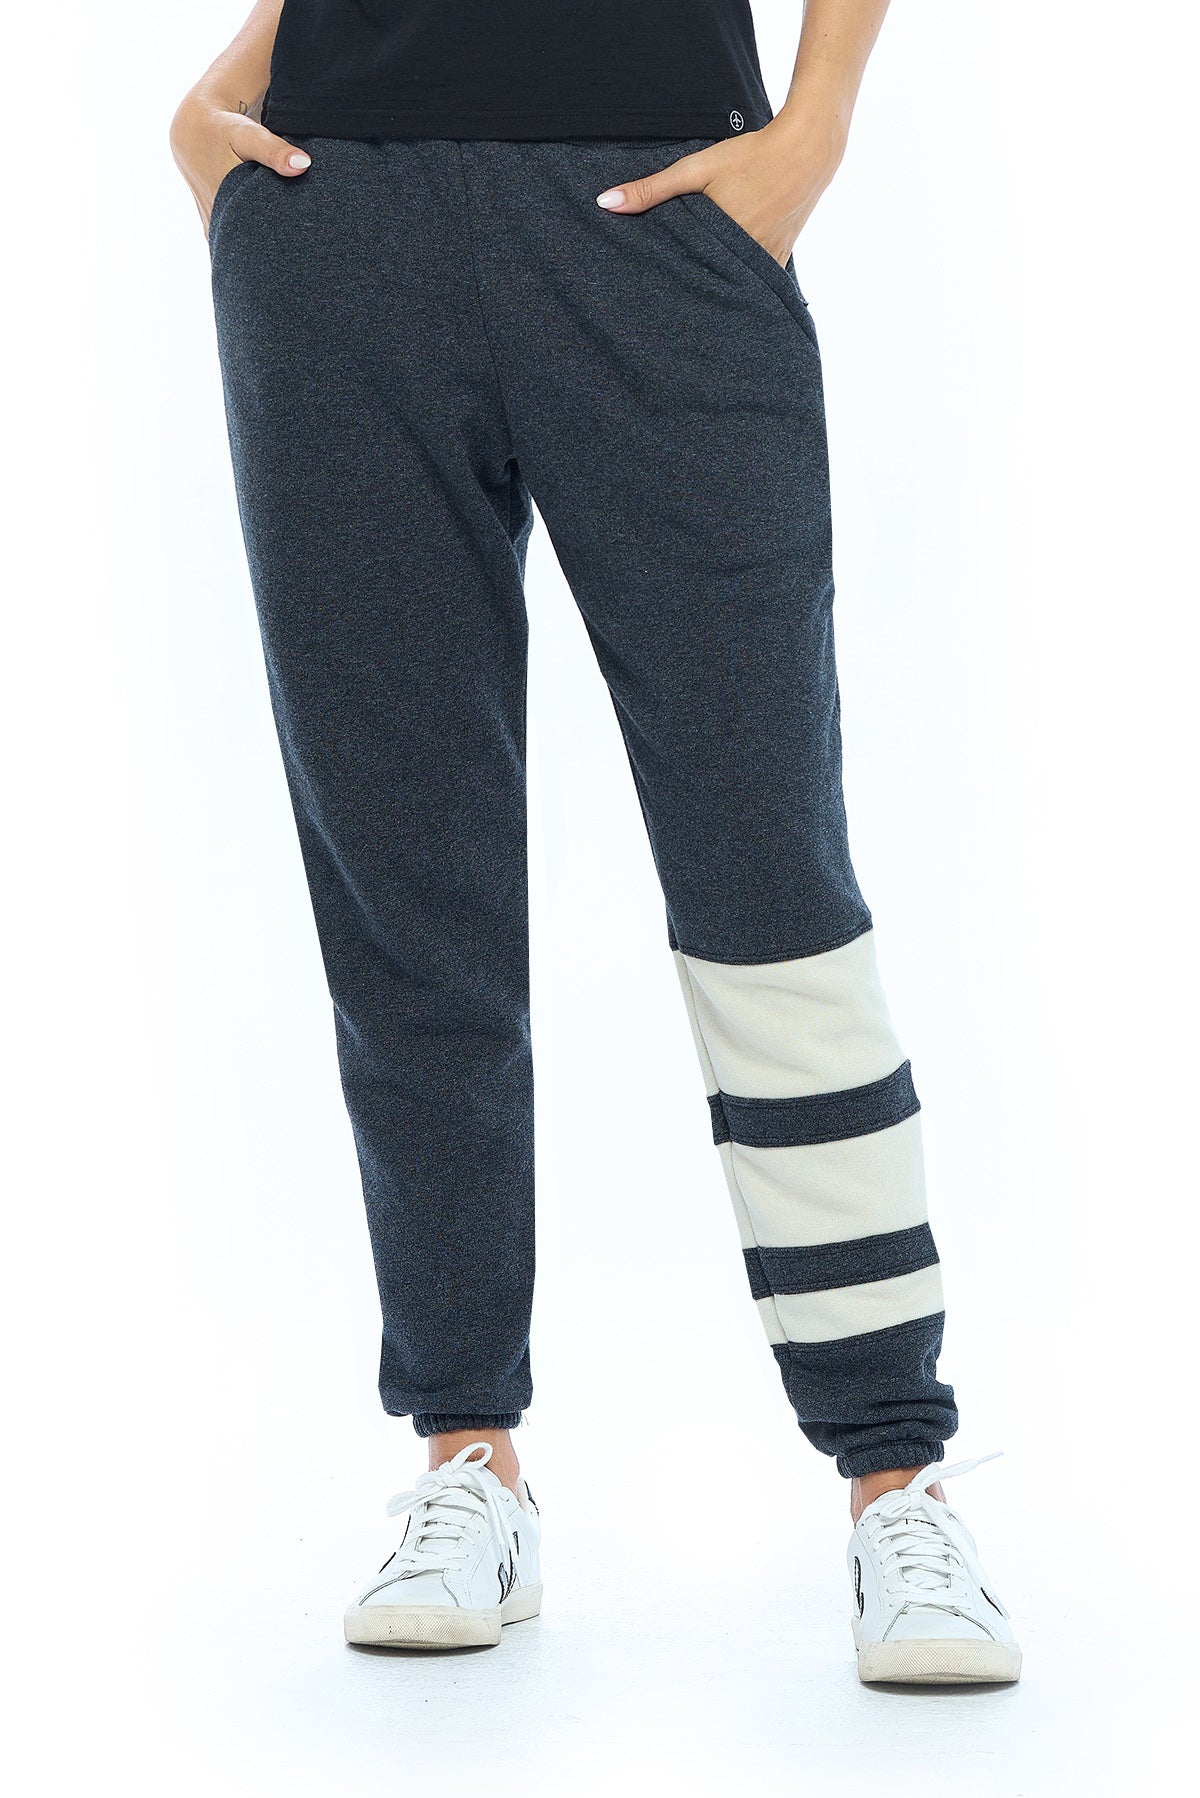 Fly. (First Love Yourself) Classic Lounge Sweats: Midnight Black